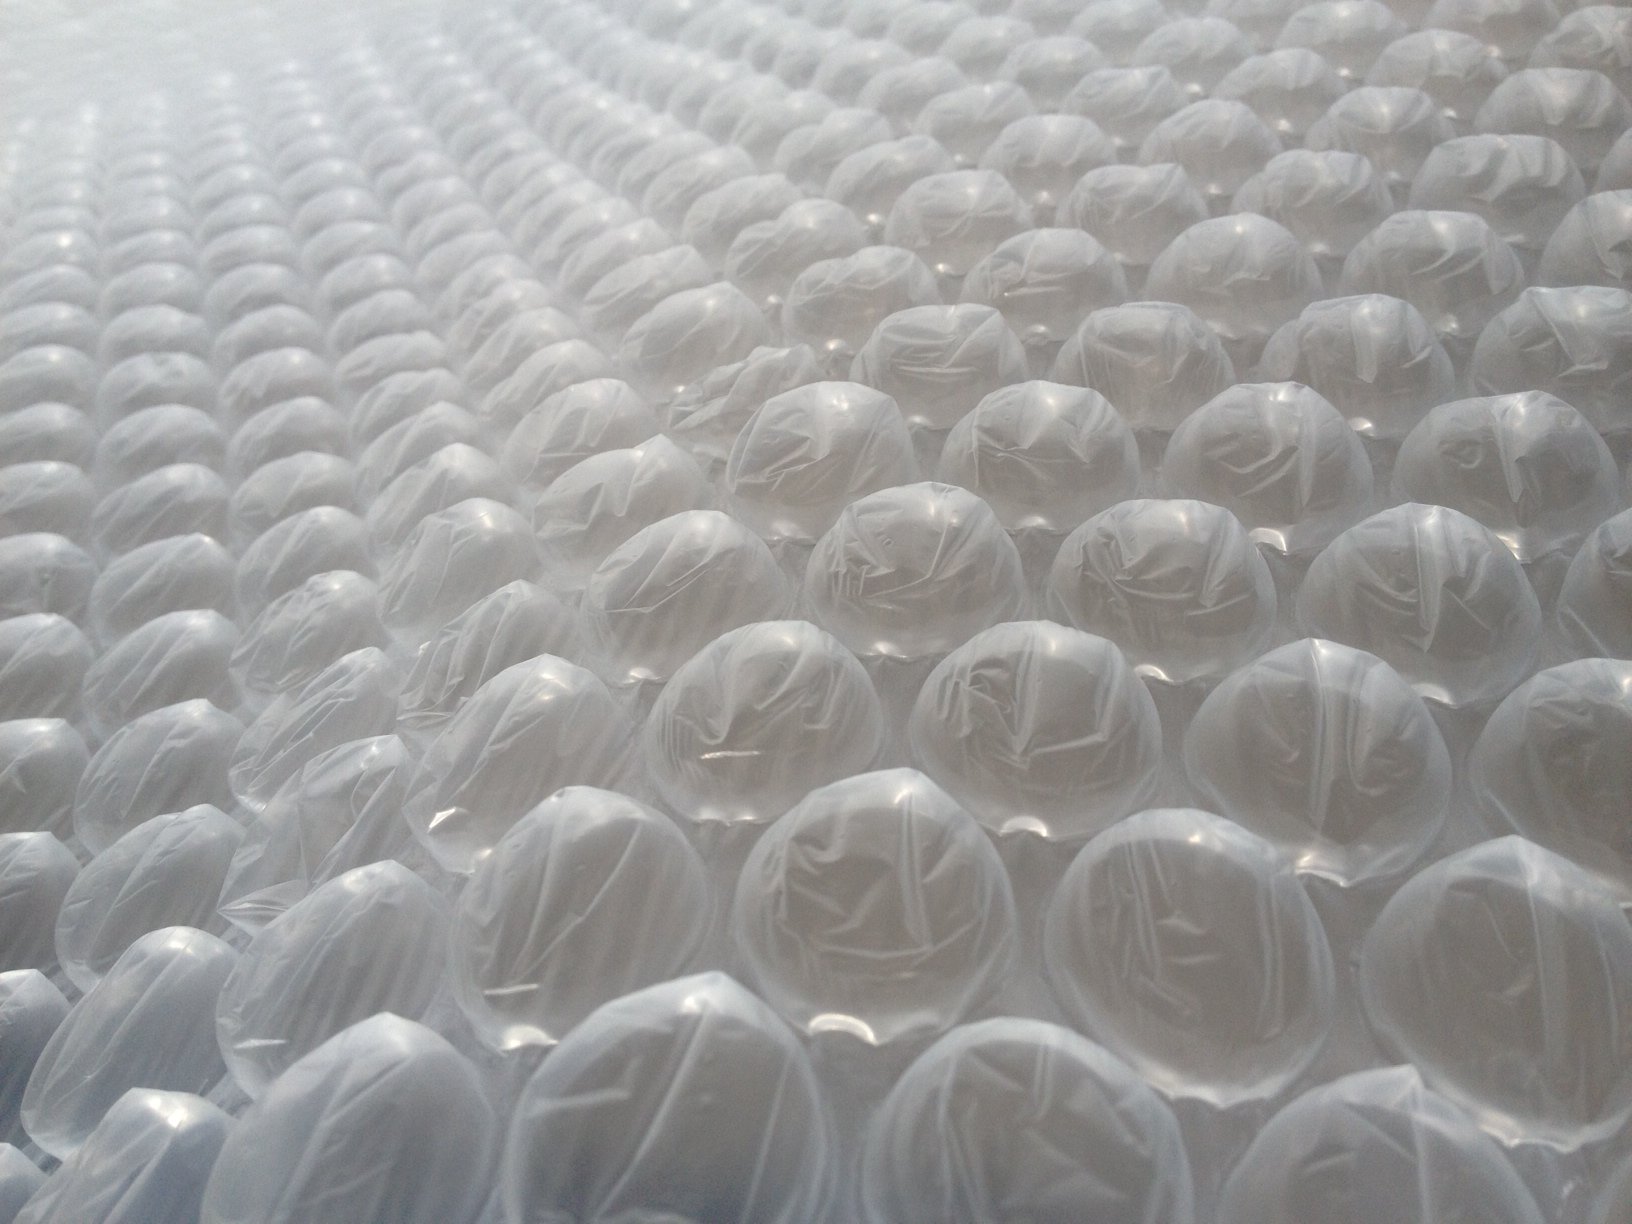 Sealed Air releases video on how Bubble Wrap is made | Make: